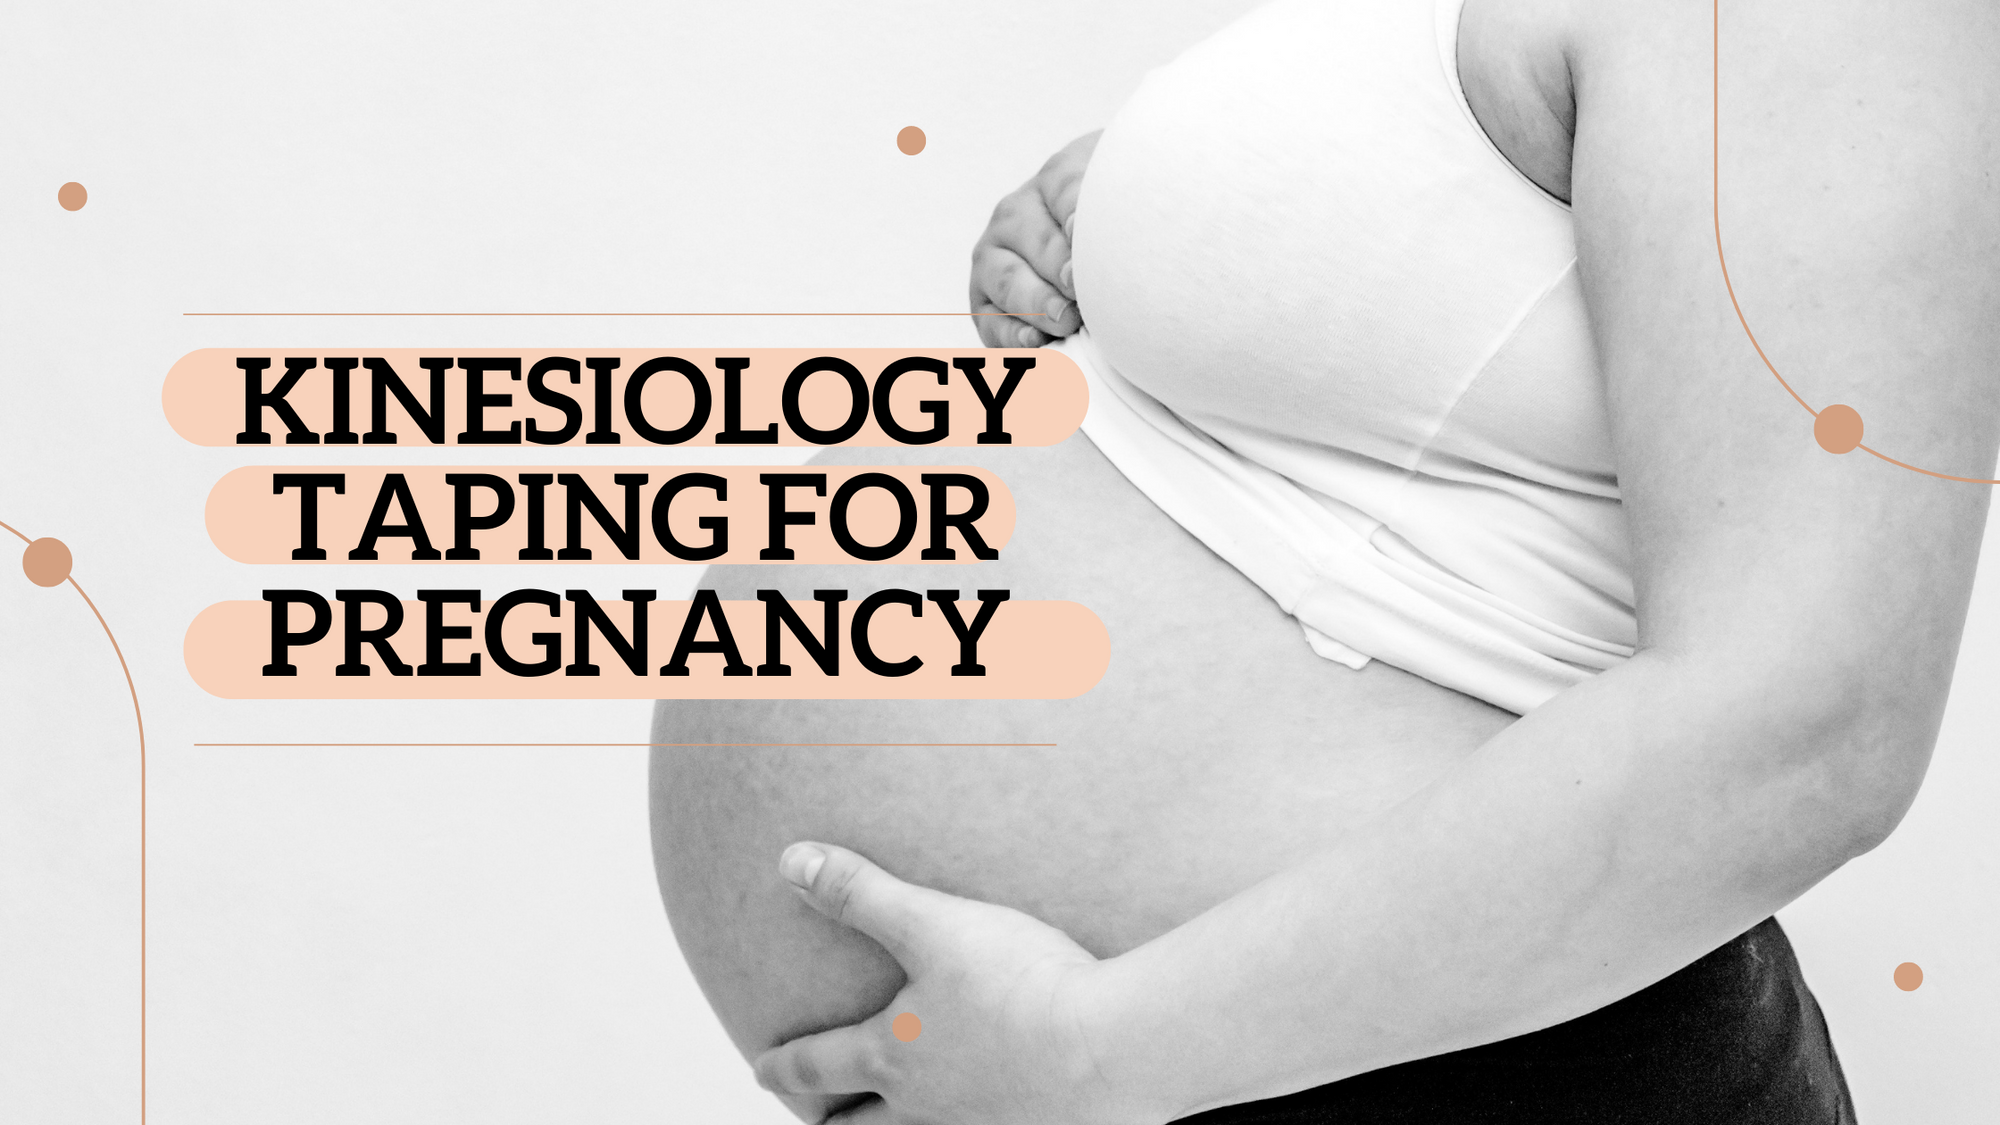 How to apply kinesiology tape for pregnancy